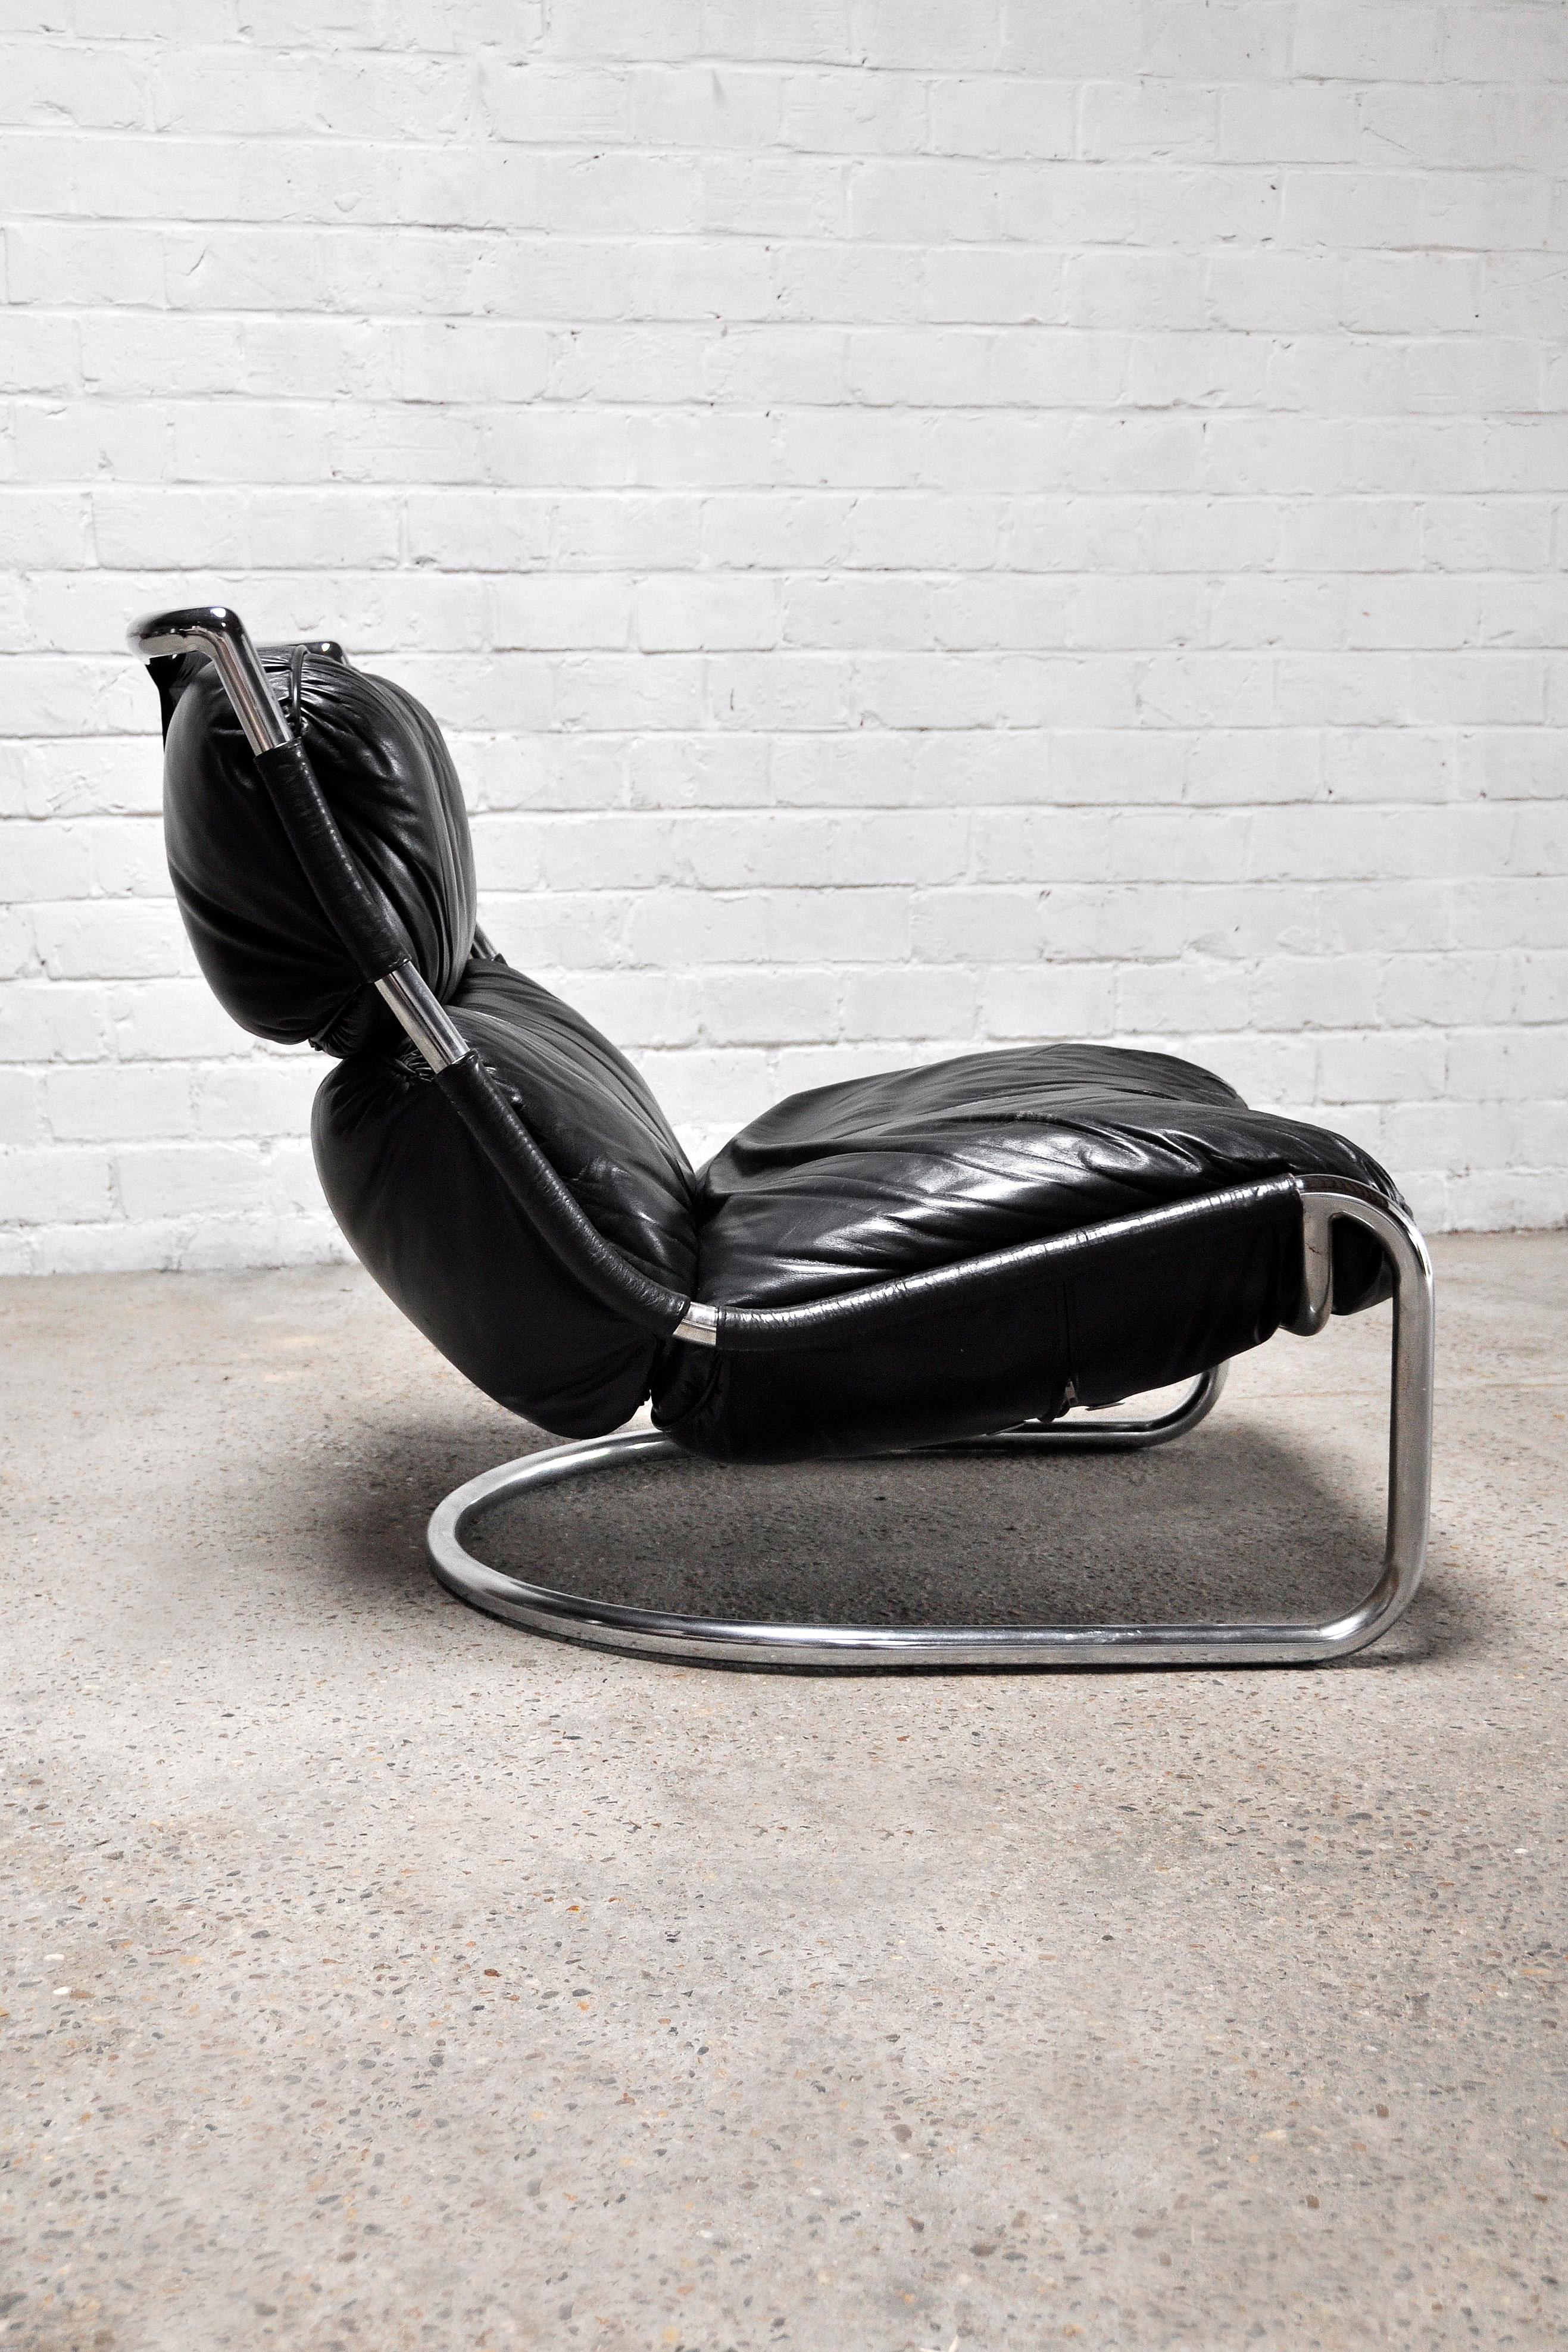 A tubular leather lounge chair made in Italy in the 1970's. A very functional and light model thanks to the combination of strong, lasting materials. The chair features a low design profile with bended tubular steel tubes and thick black leather